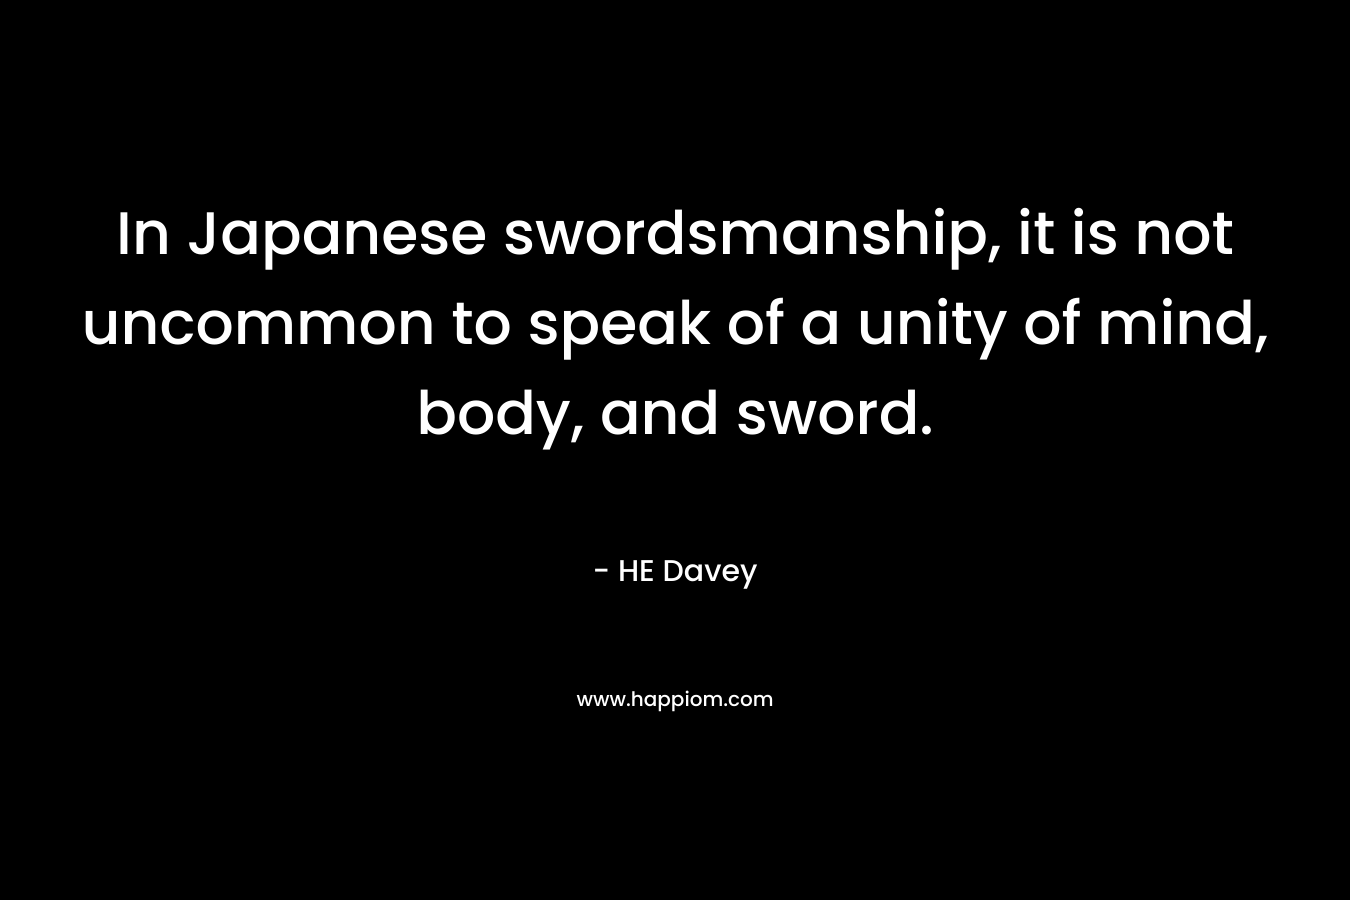 In Japanese swordsmanship, it is not uncommon to speak of a unity of mind, body, and sword. – HE Davey